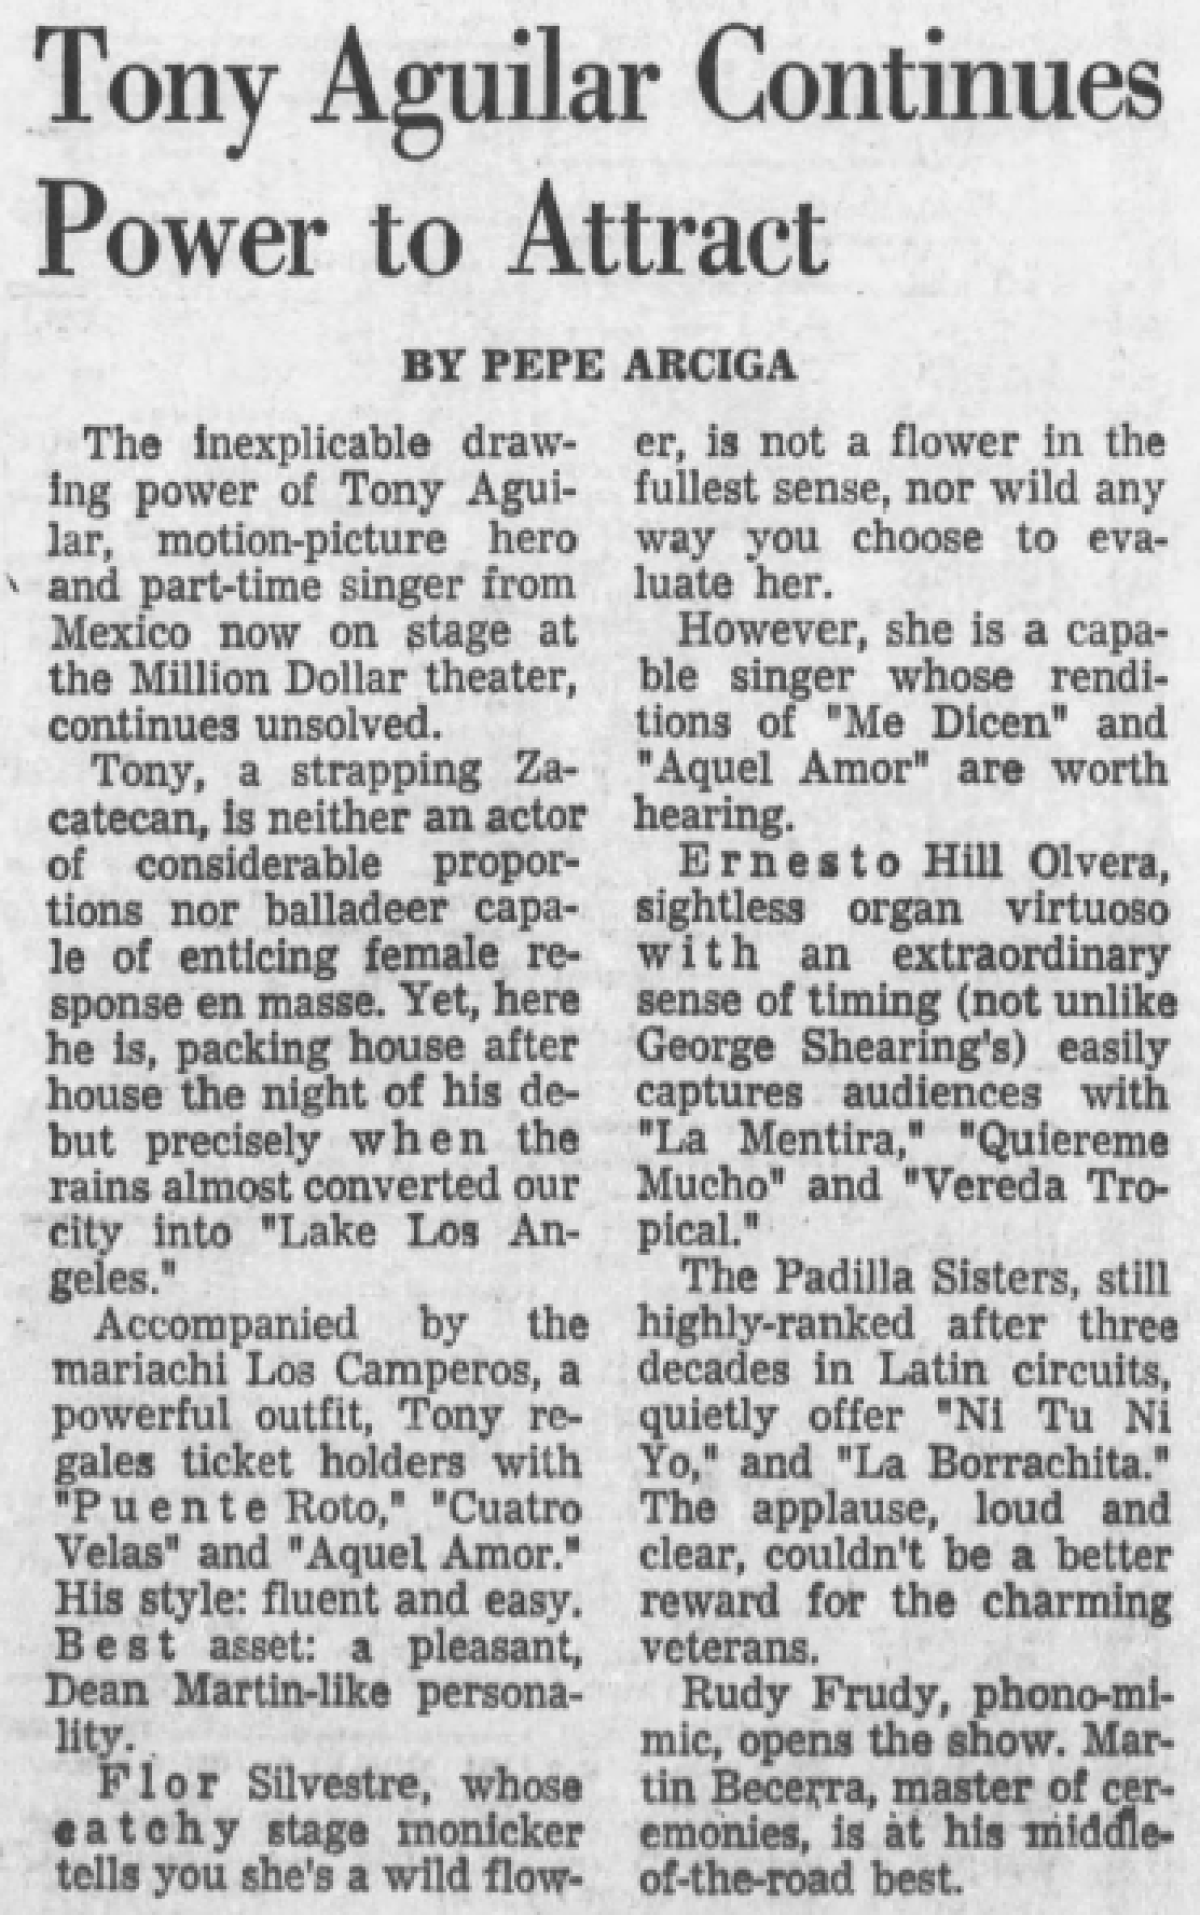 1966 Los Angeles Times concert review of Antonio Aguilar at the Million Dollar Theater